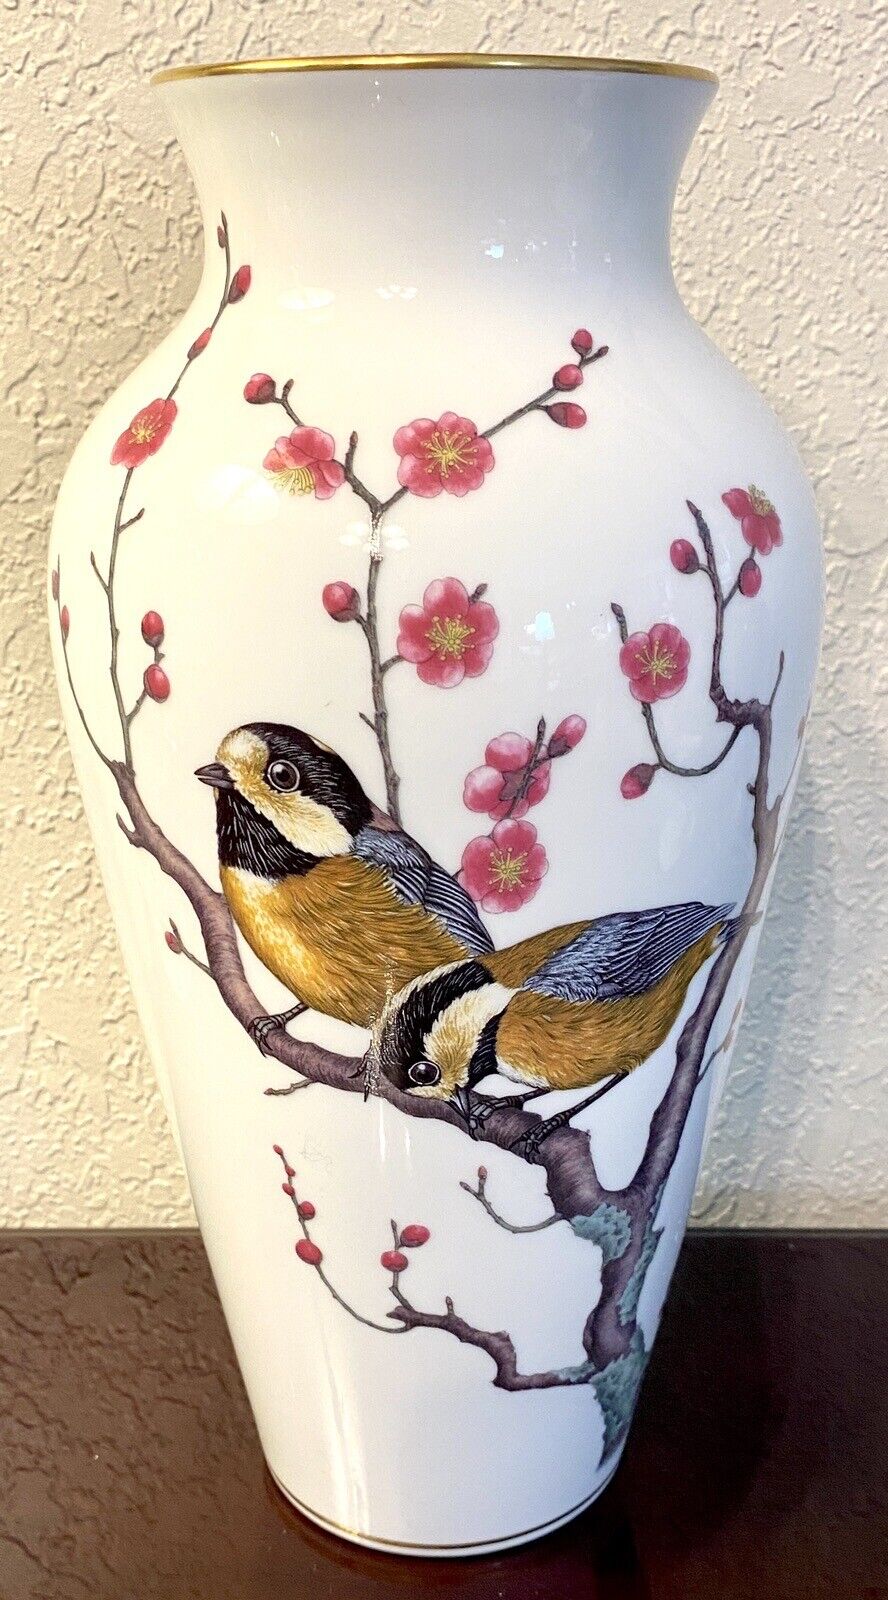 Franklin Mint Heralds Of Spring Vase Birds Cherry Blossoms Hand Painted Signed